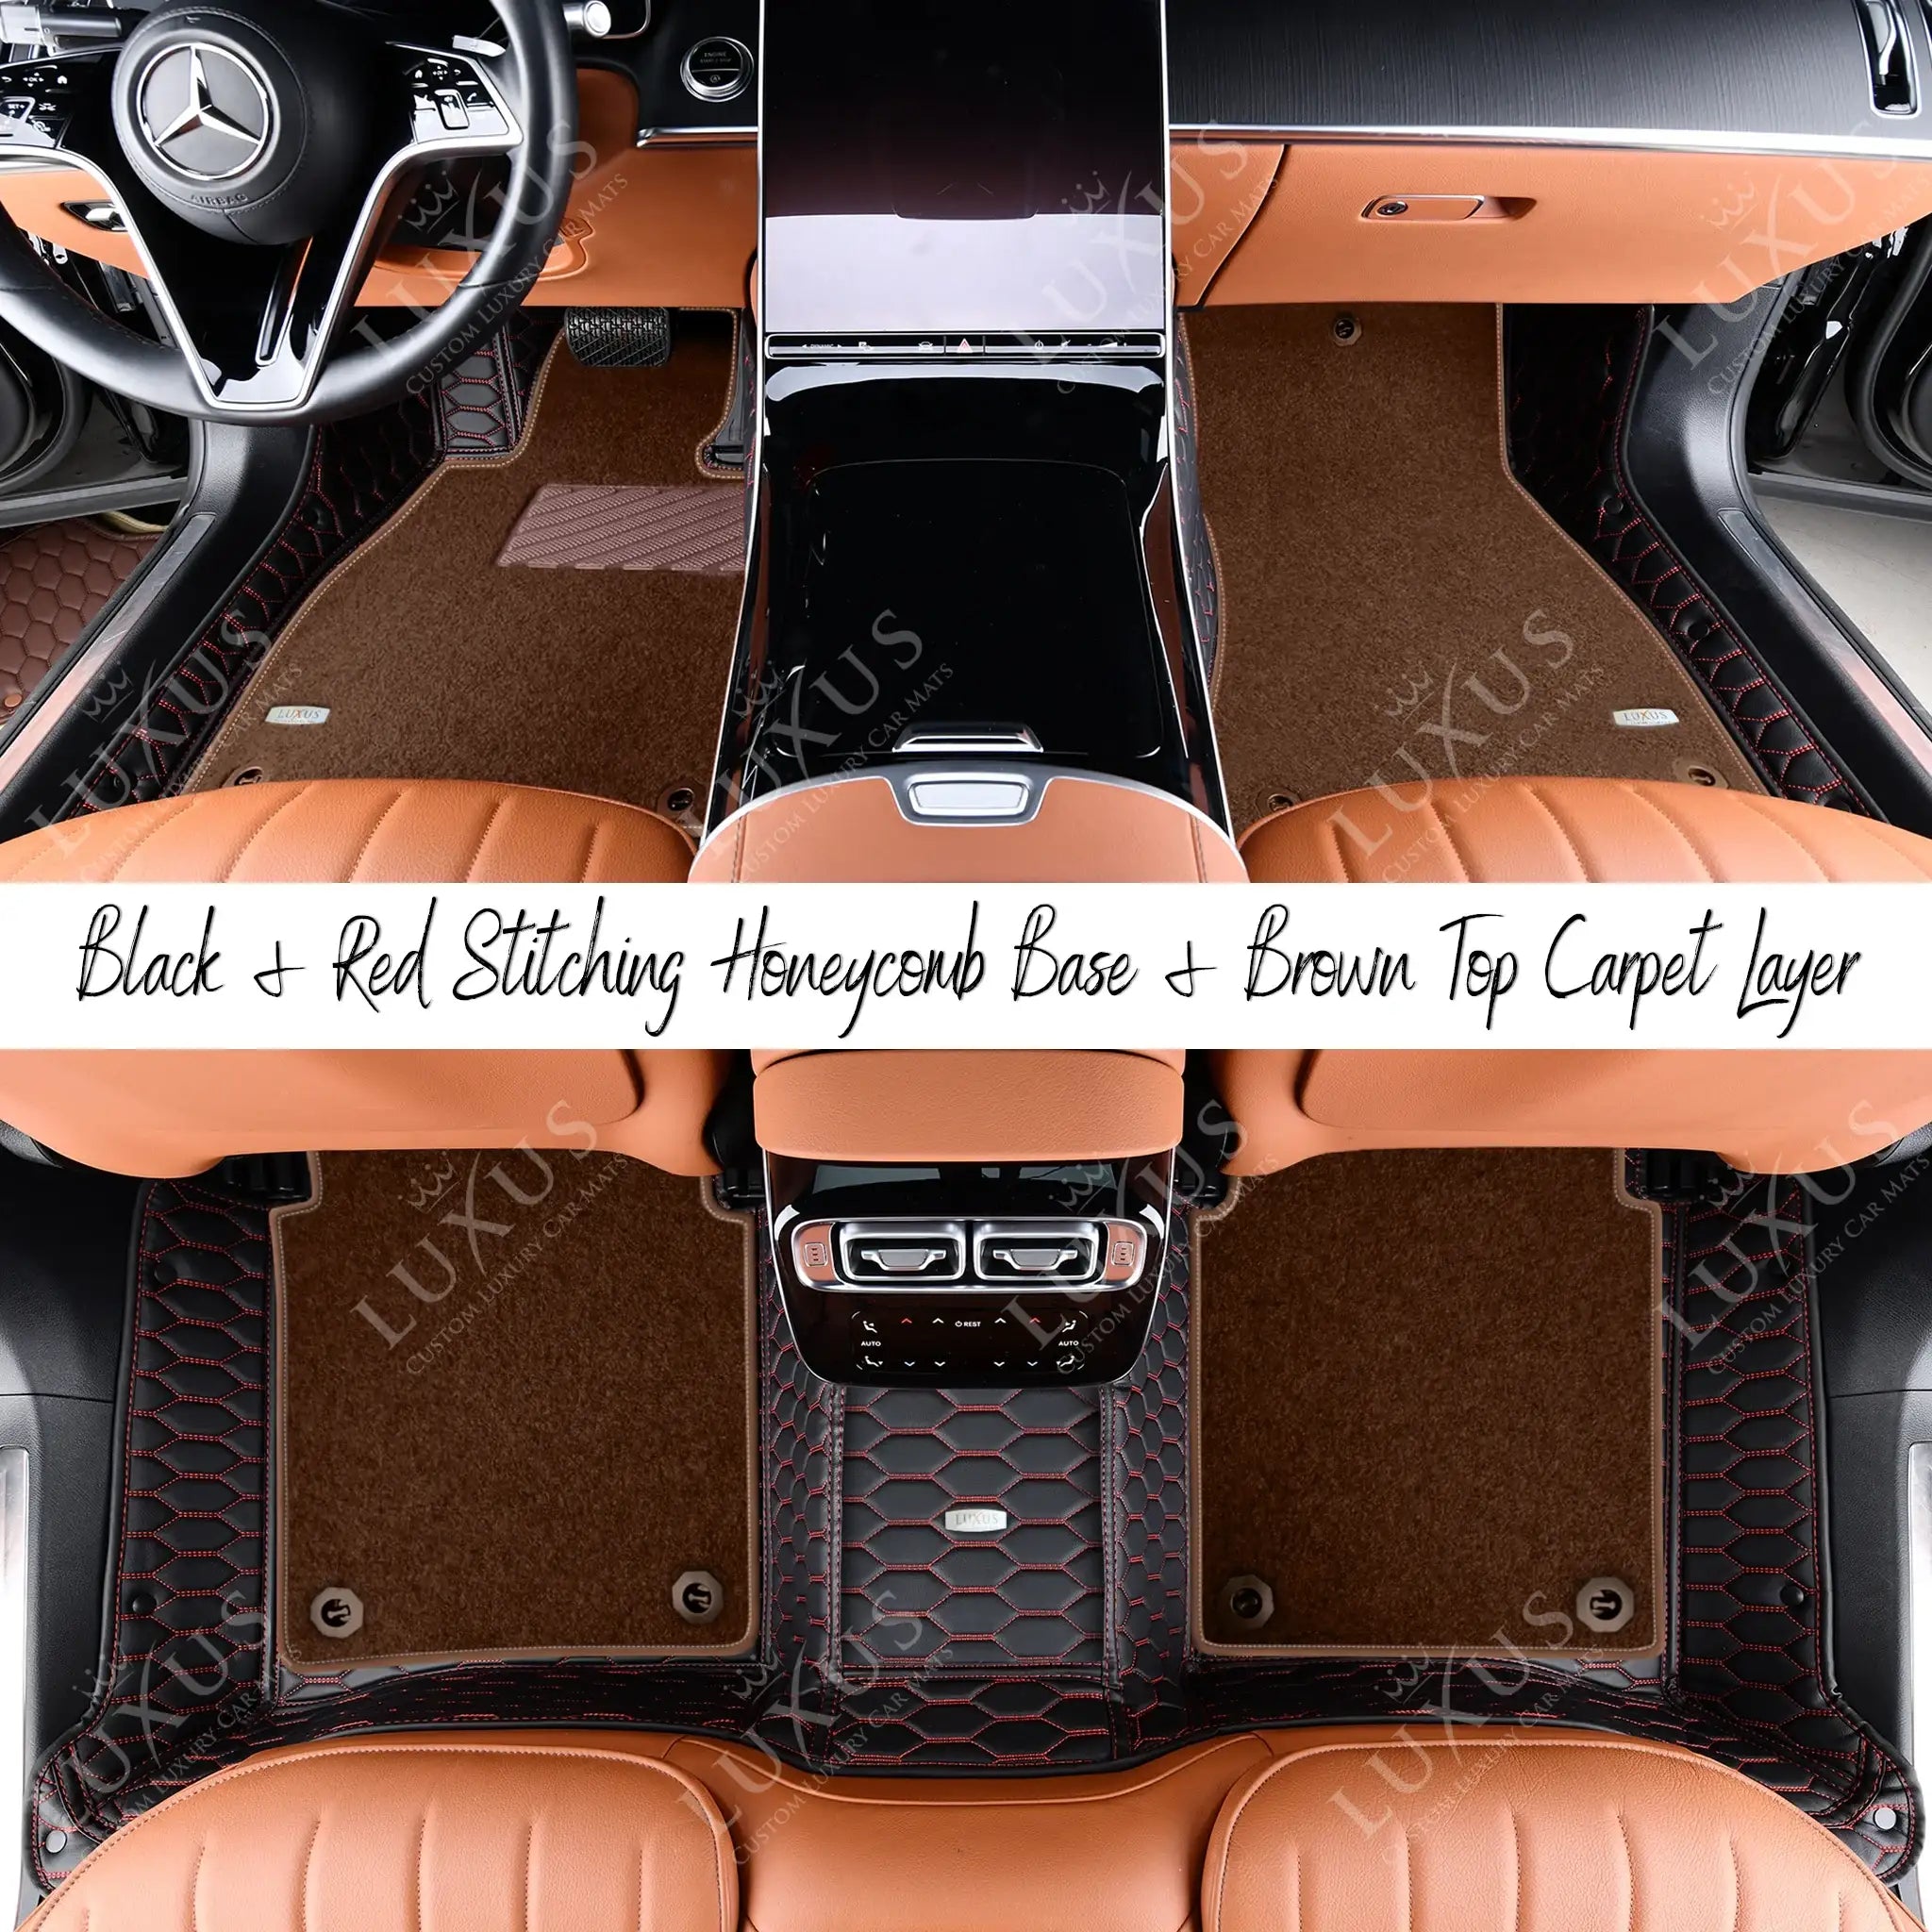 Black & Red Stitching Honeycomb Base & Brown Top Carpet Double Layer Luxury Car Mats Set